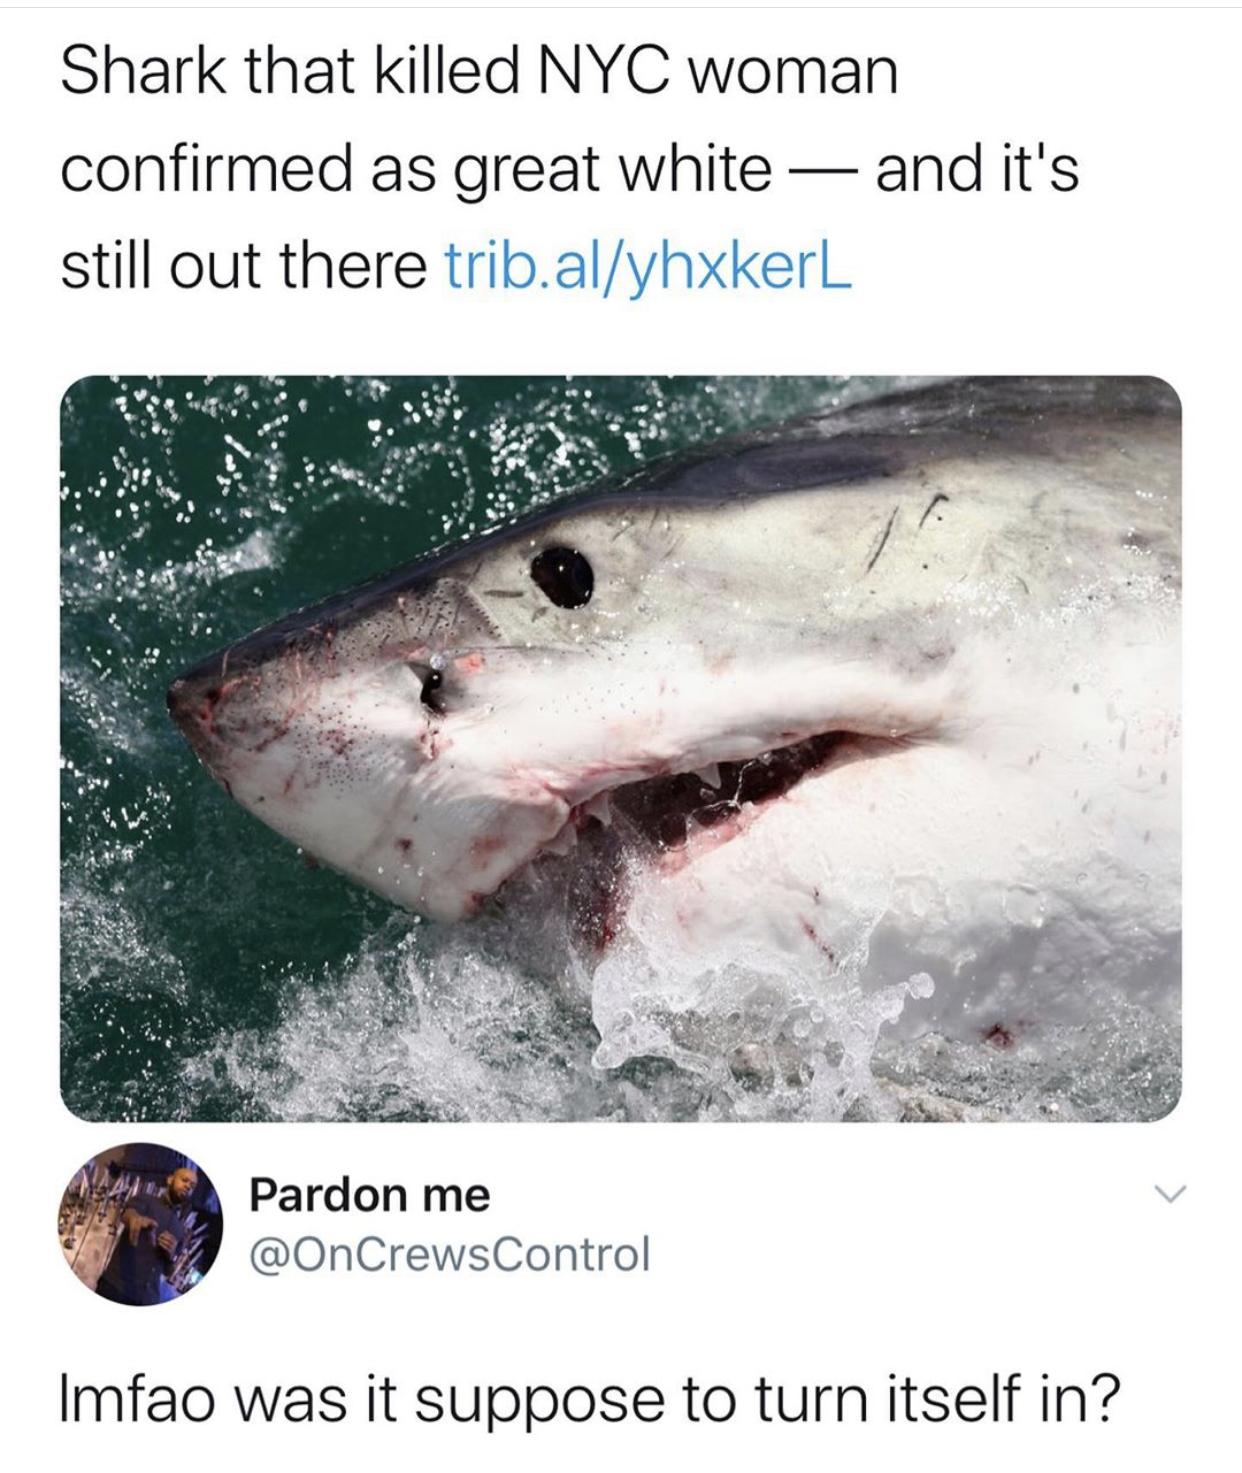 great white shark eyes - Shark that killed Nyc woman confirmed as great white and it's still out there trib.alyhxkerL Pardon me Imfao was it suppose to turn itself in?